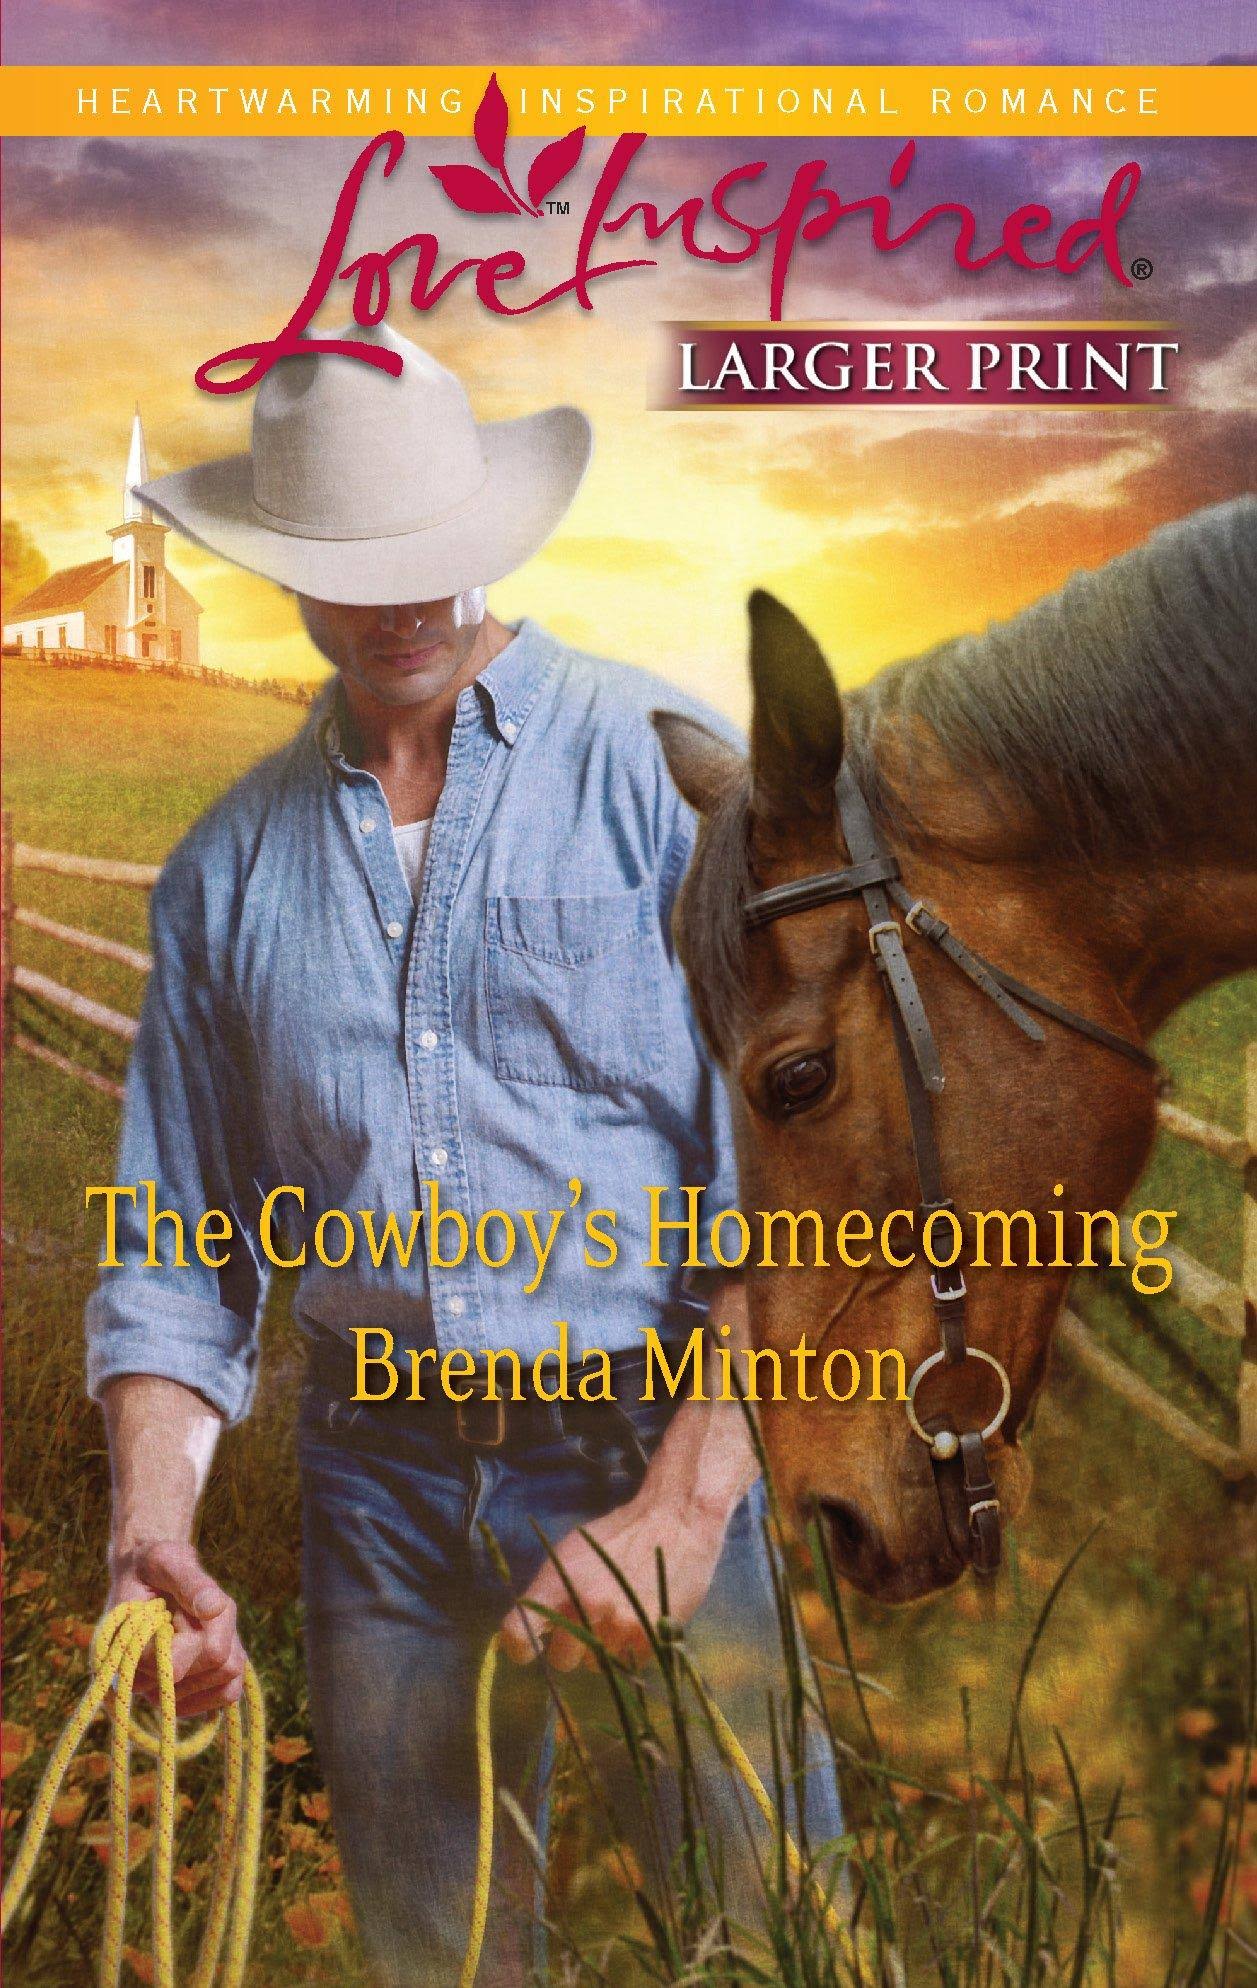 The Cowboy's Homecoming [Book]